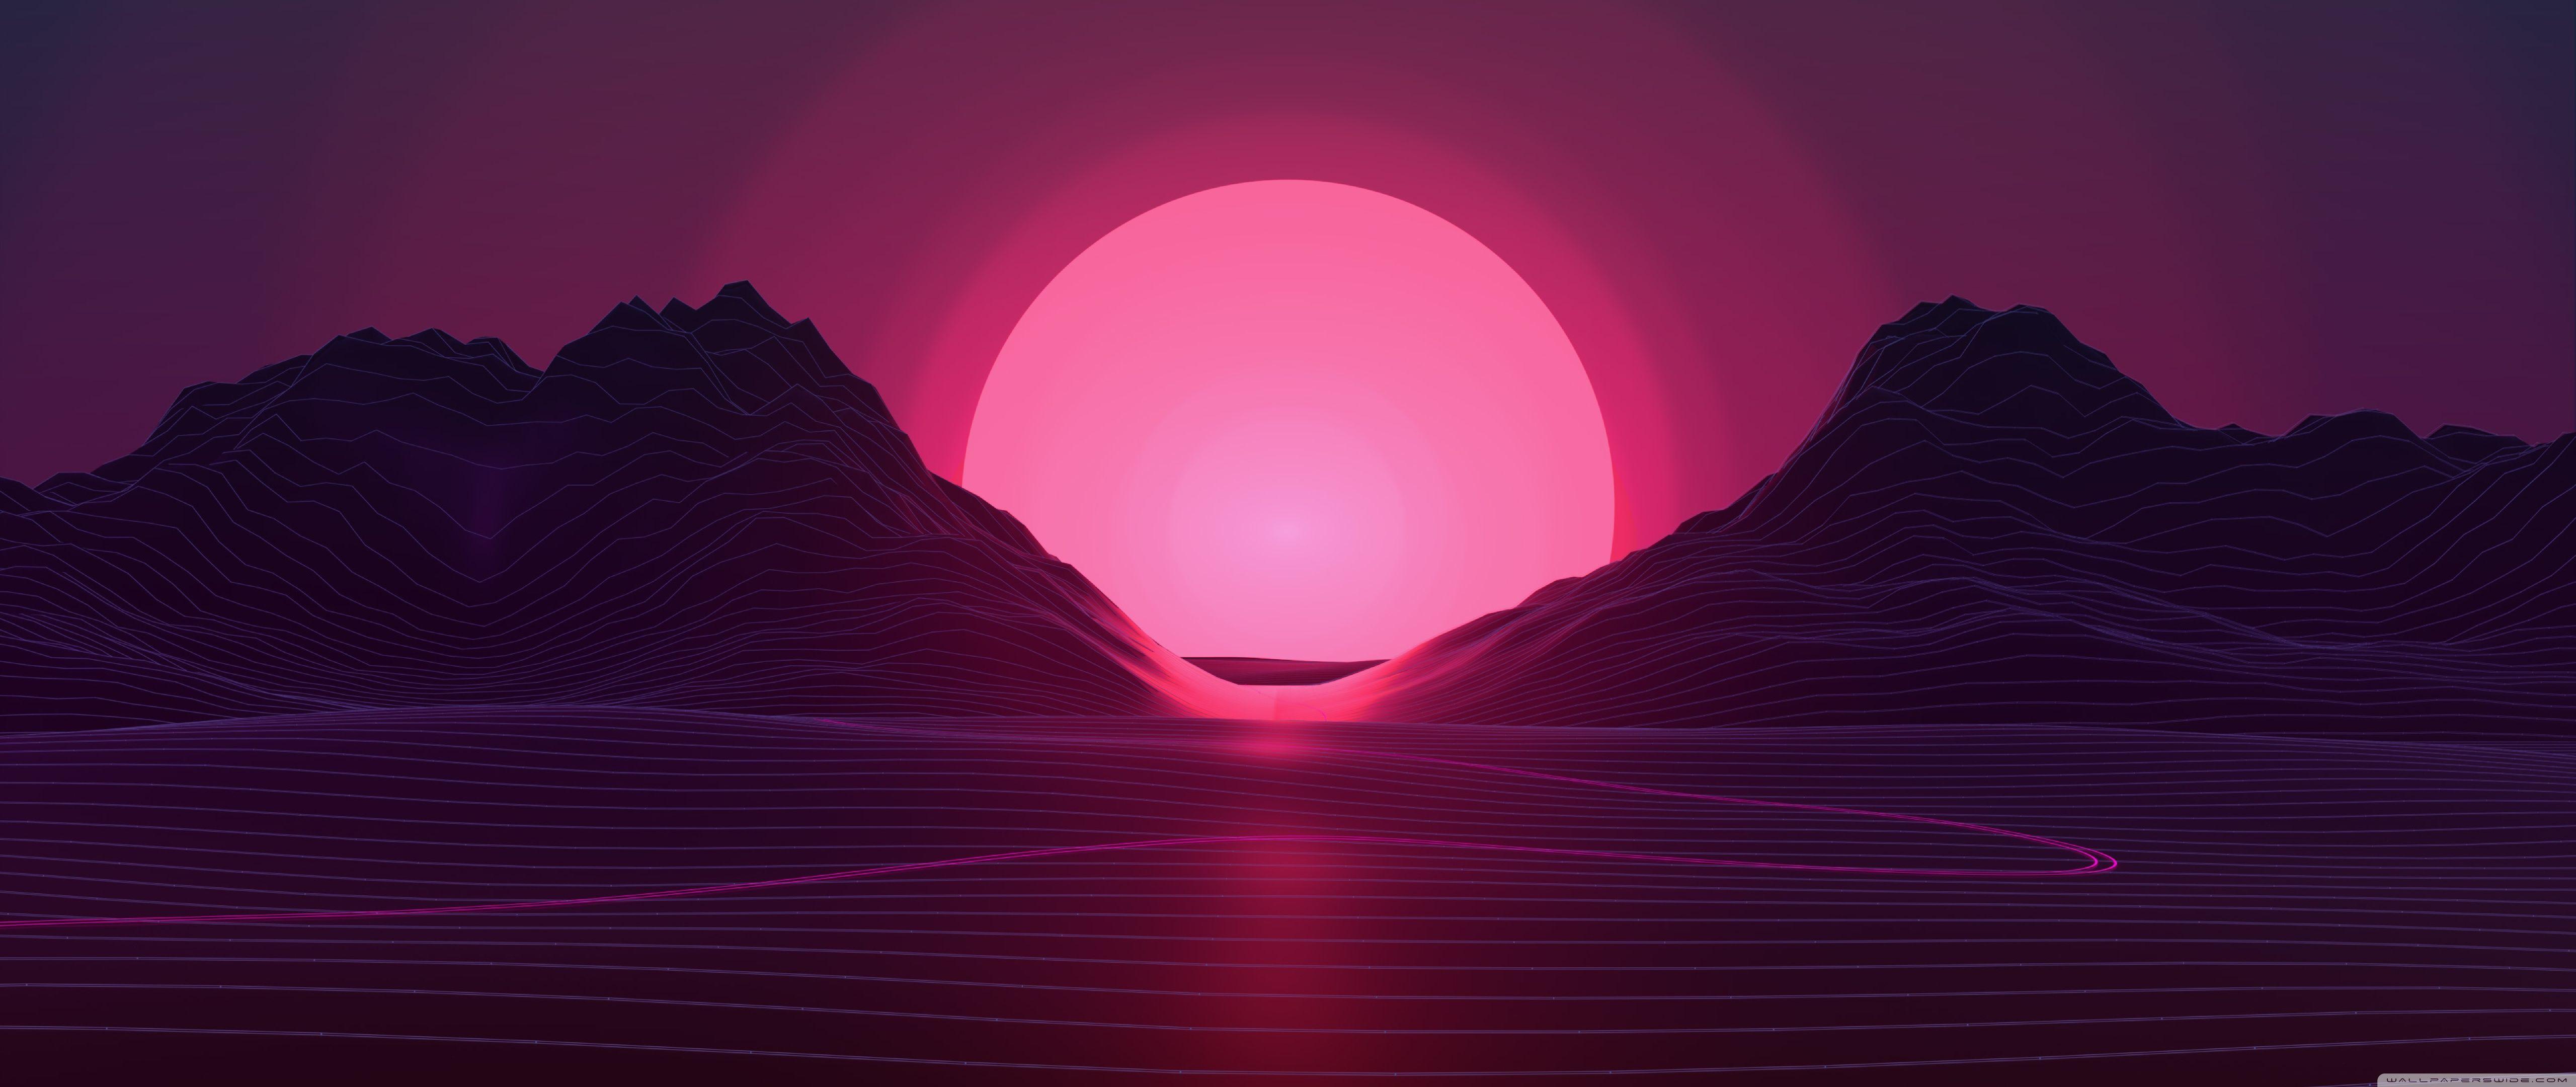 Synthwave K Wallpapers Top Free Synthwave K Backgrounds Wallpaperaccess